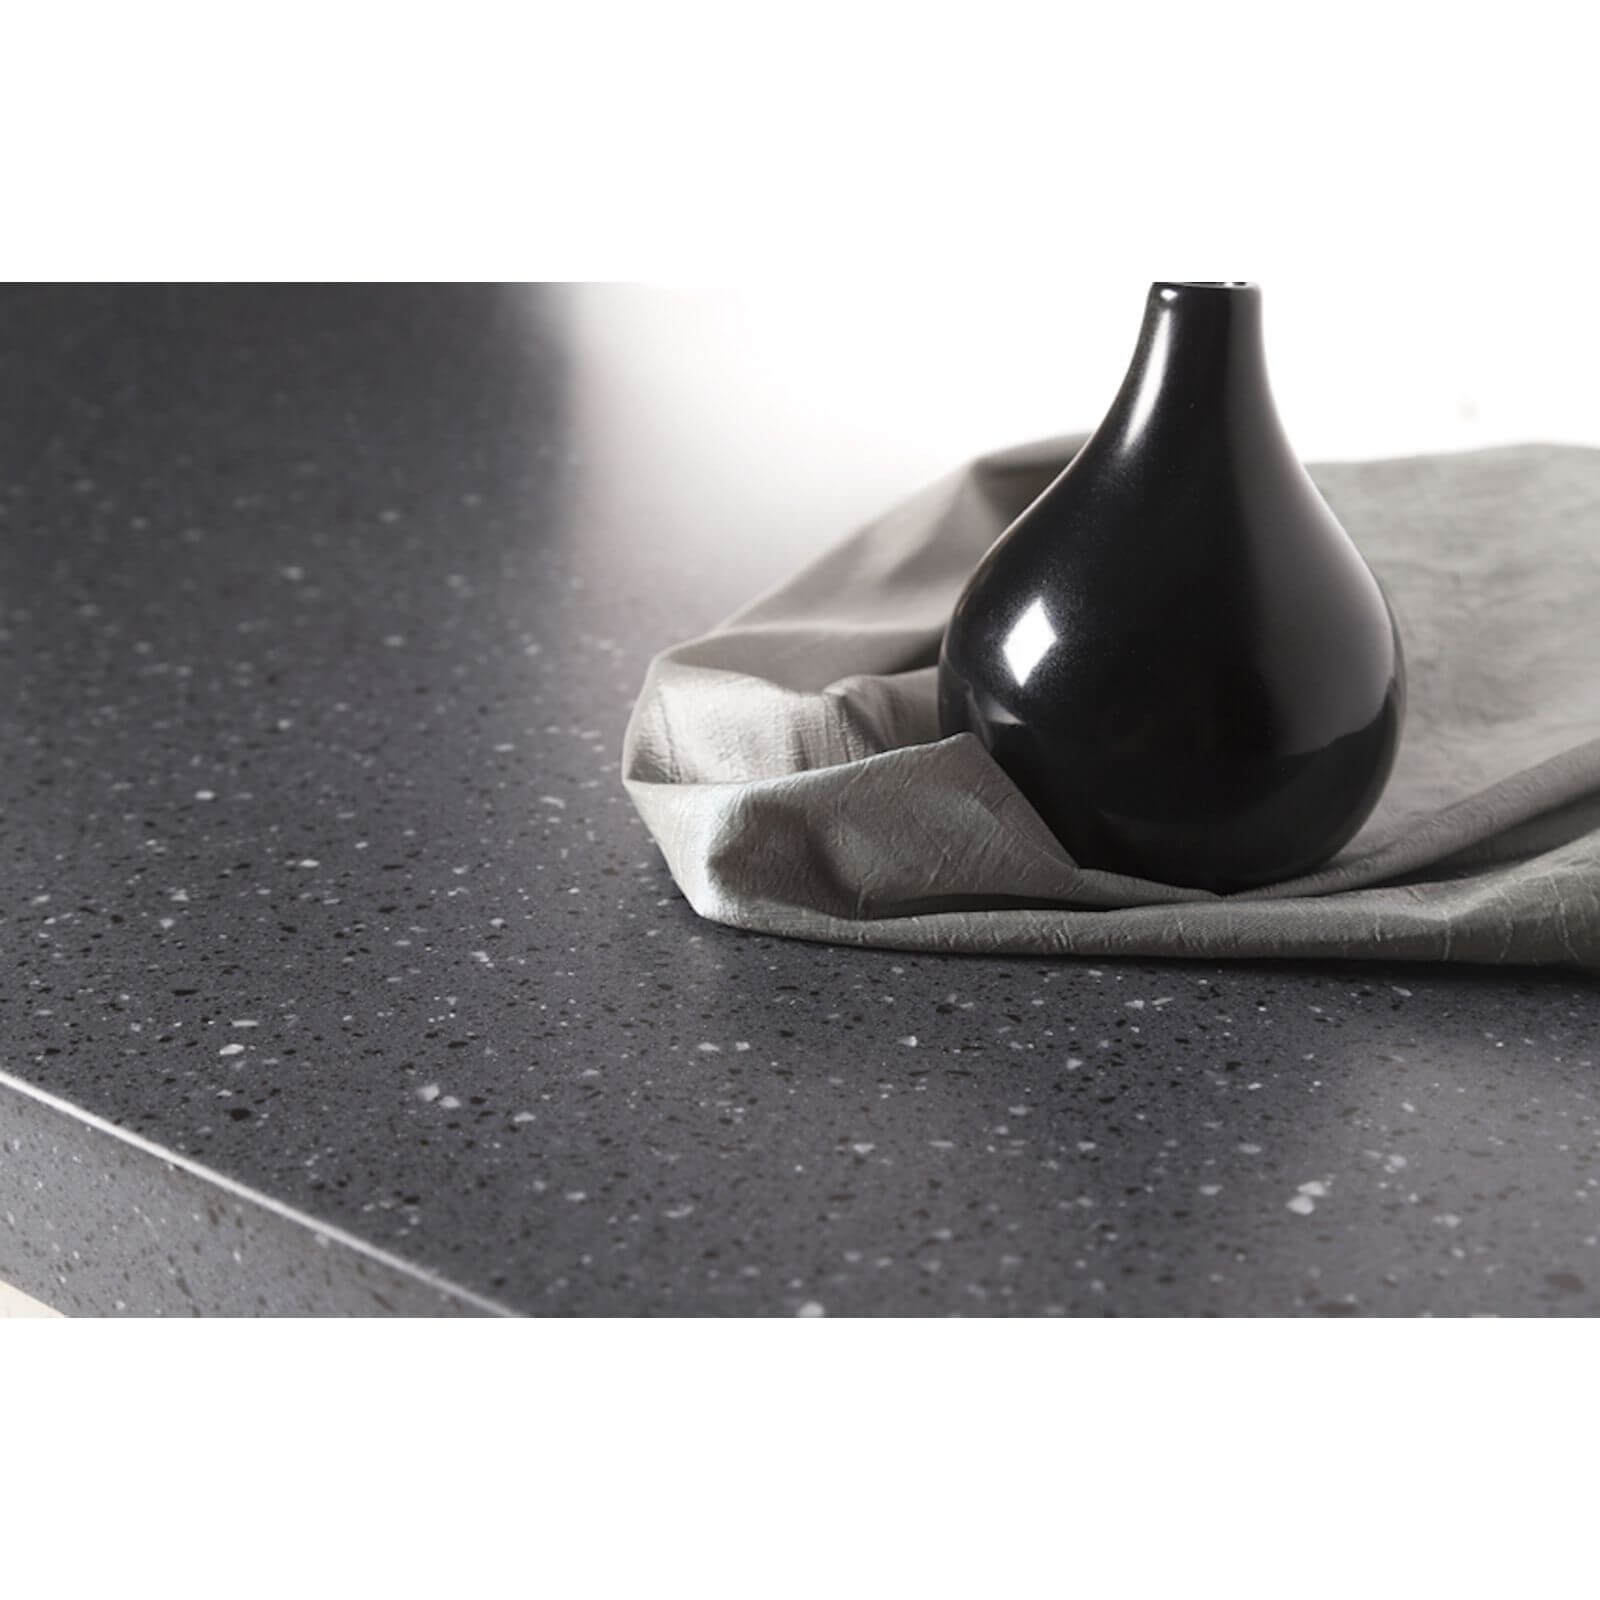 Maia Greystone Kitchen Sink Worktop - Acrylic Super Large Right Hand Bowl - 3600 x 650 x 42mm